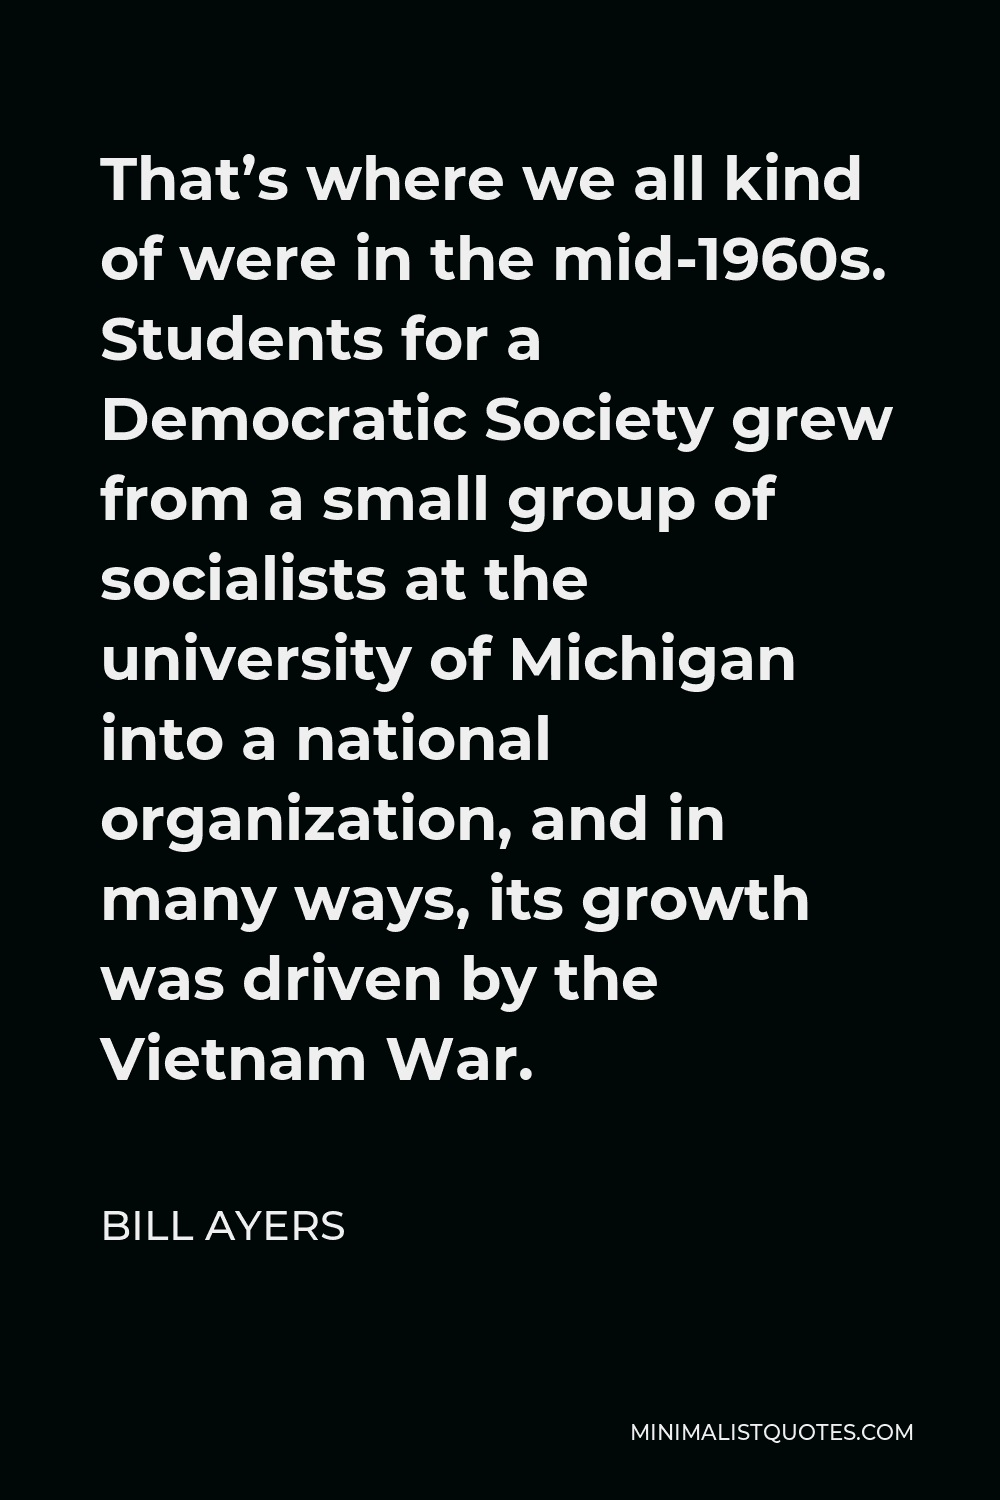 Bill Ayers Quote - That’s where we all kind of were in the mid-1960s. Students for a Democratic Society grew from a small group of socialists at the university of Michigan into a national organization, and in many ways, its growth was driven by the Vietnam War.